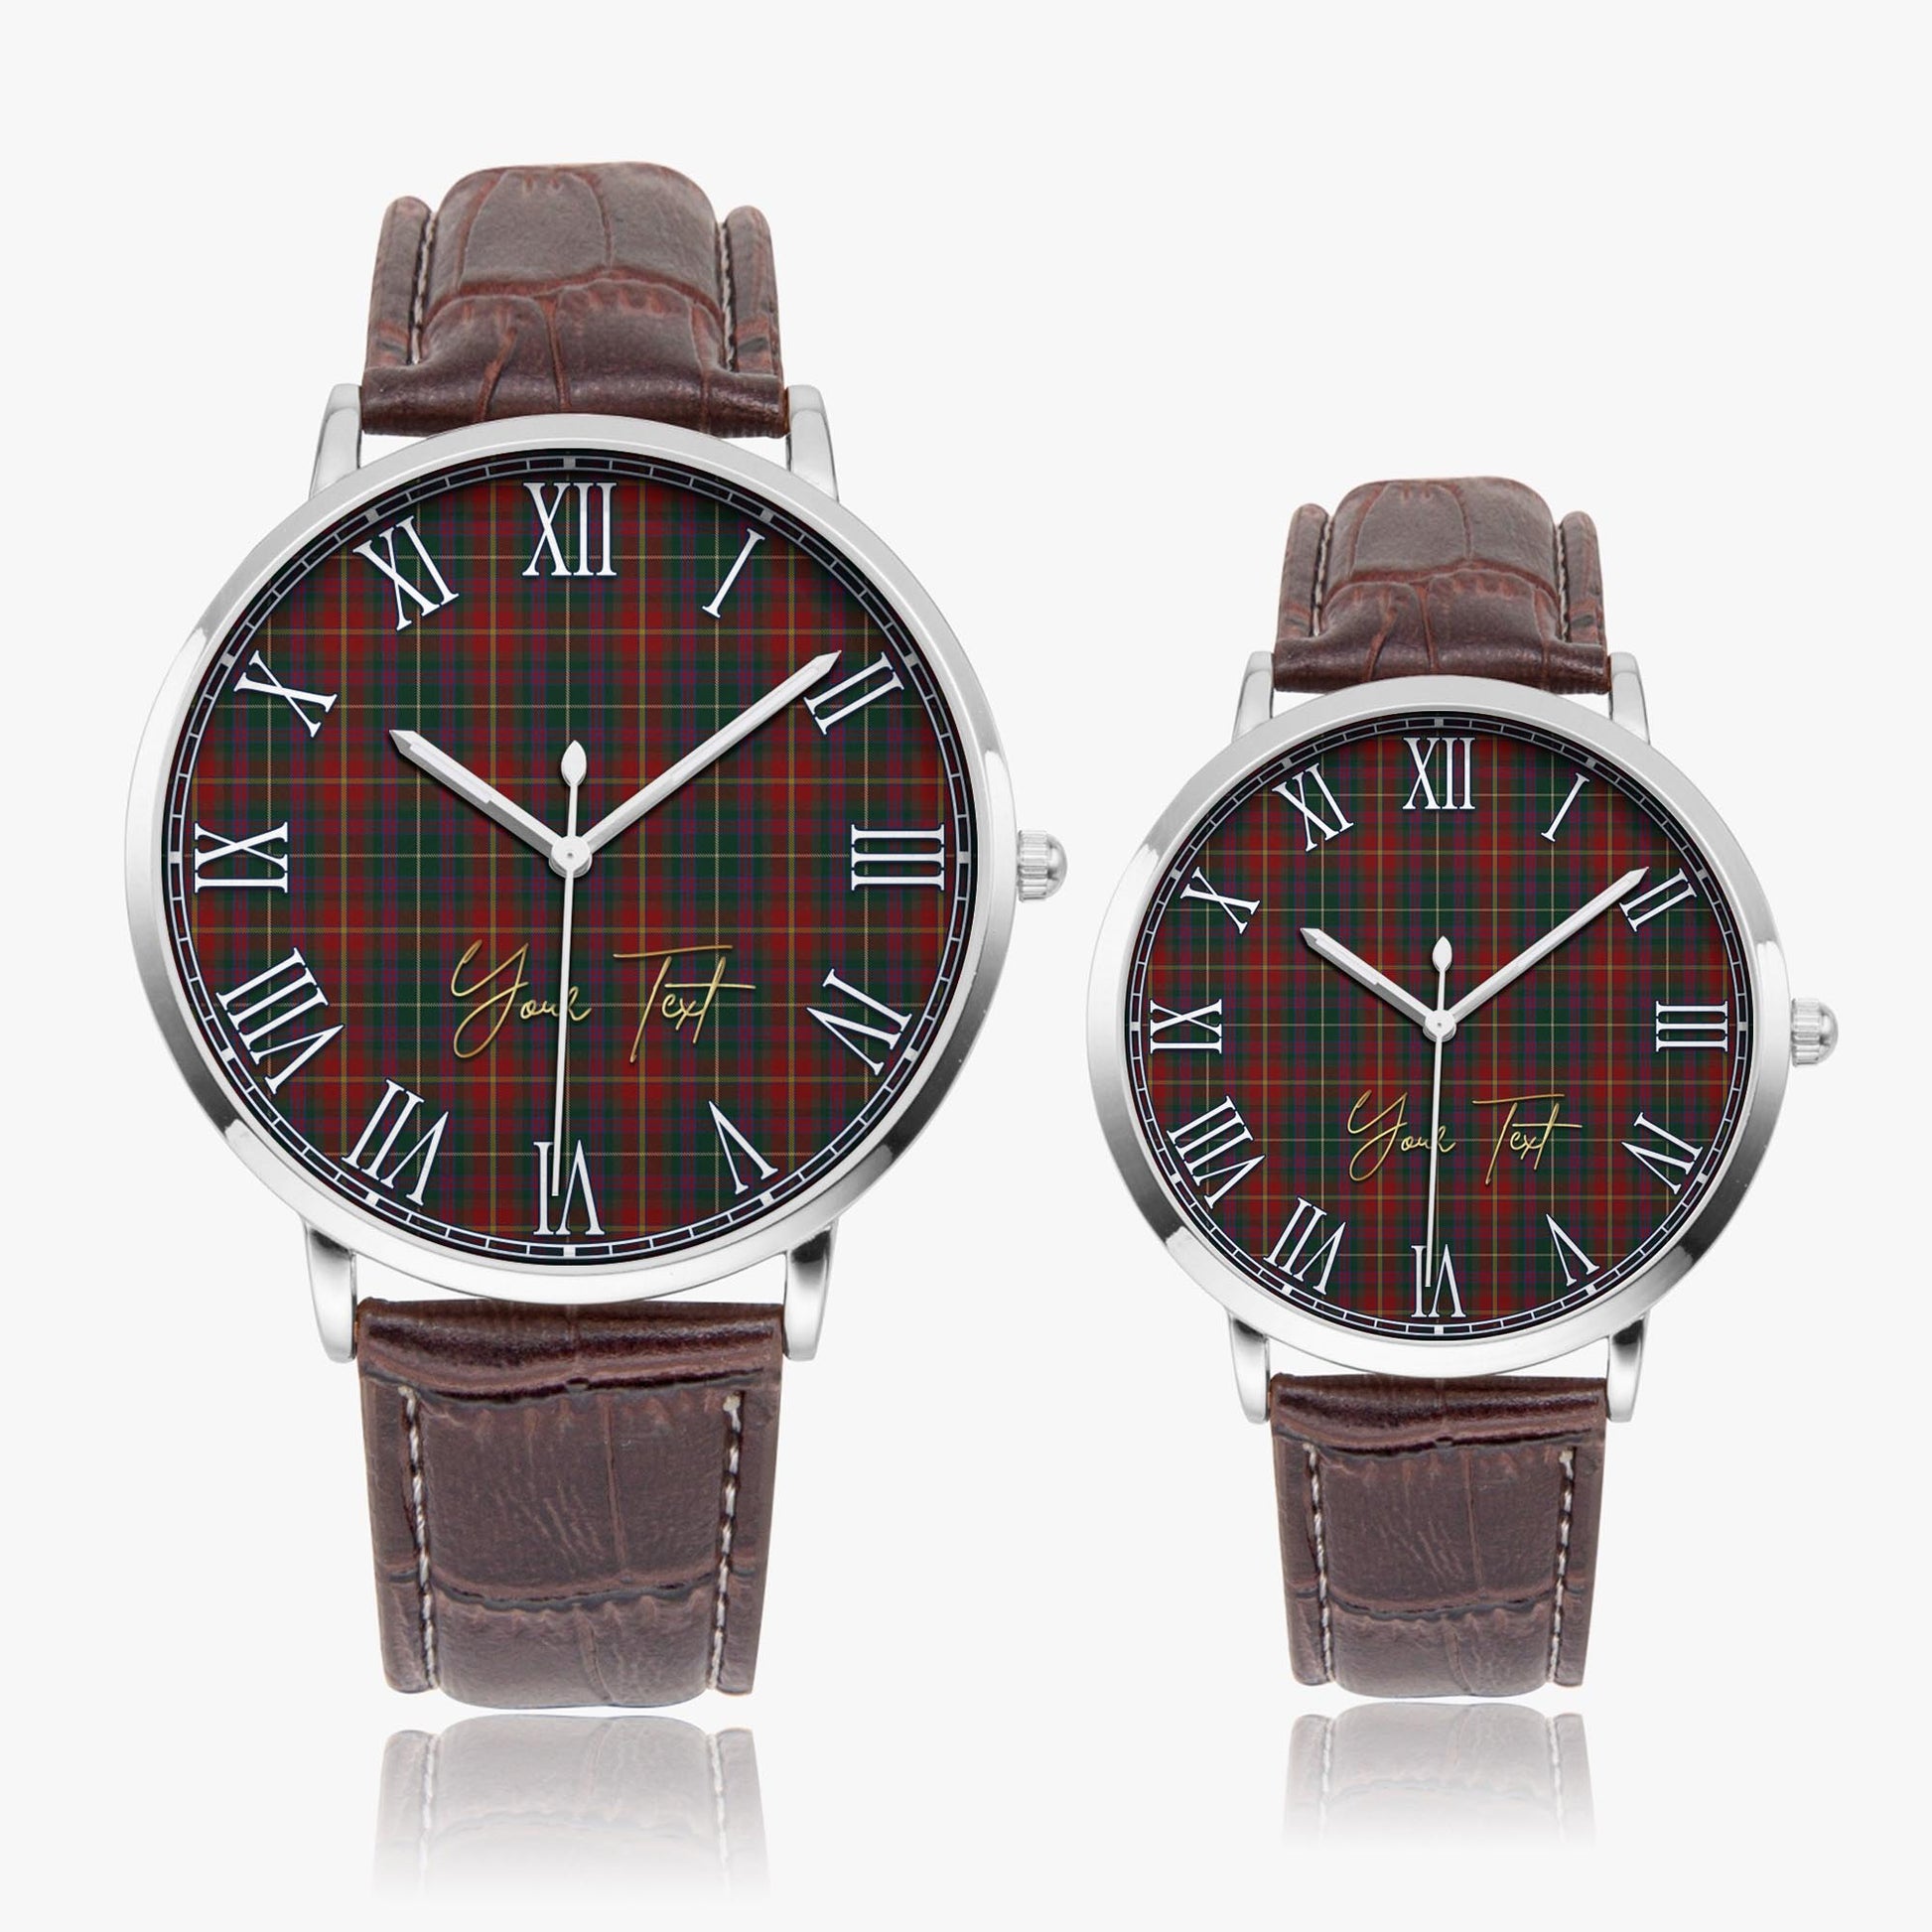 Meath County Ireland Tartan Personalized Your Text Leather Trap Quartz Watch Ultra Thin Silver Case With Brown Leather Strap - Tartanvibesclothing